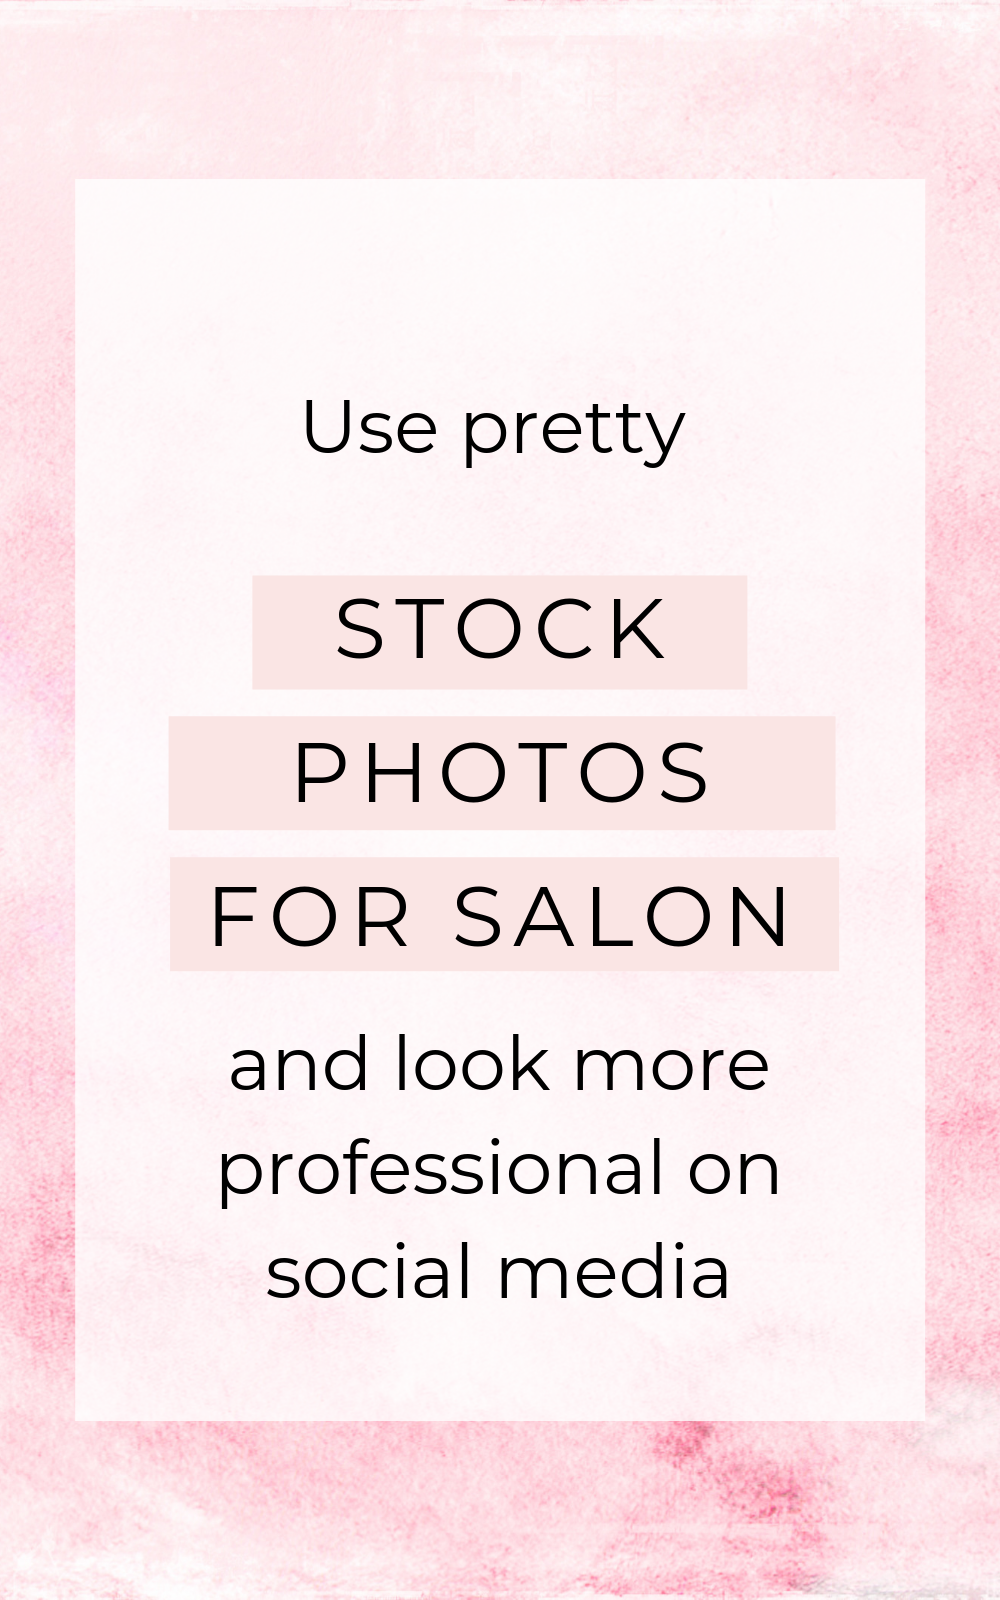 Where to find pretty, on-brand stock photos for your salon - Where to find pretty, on-brand stock photos for your salon -   18 beauty Care salon ideas